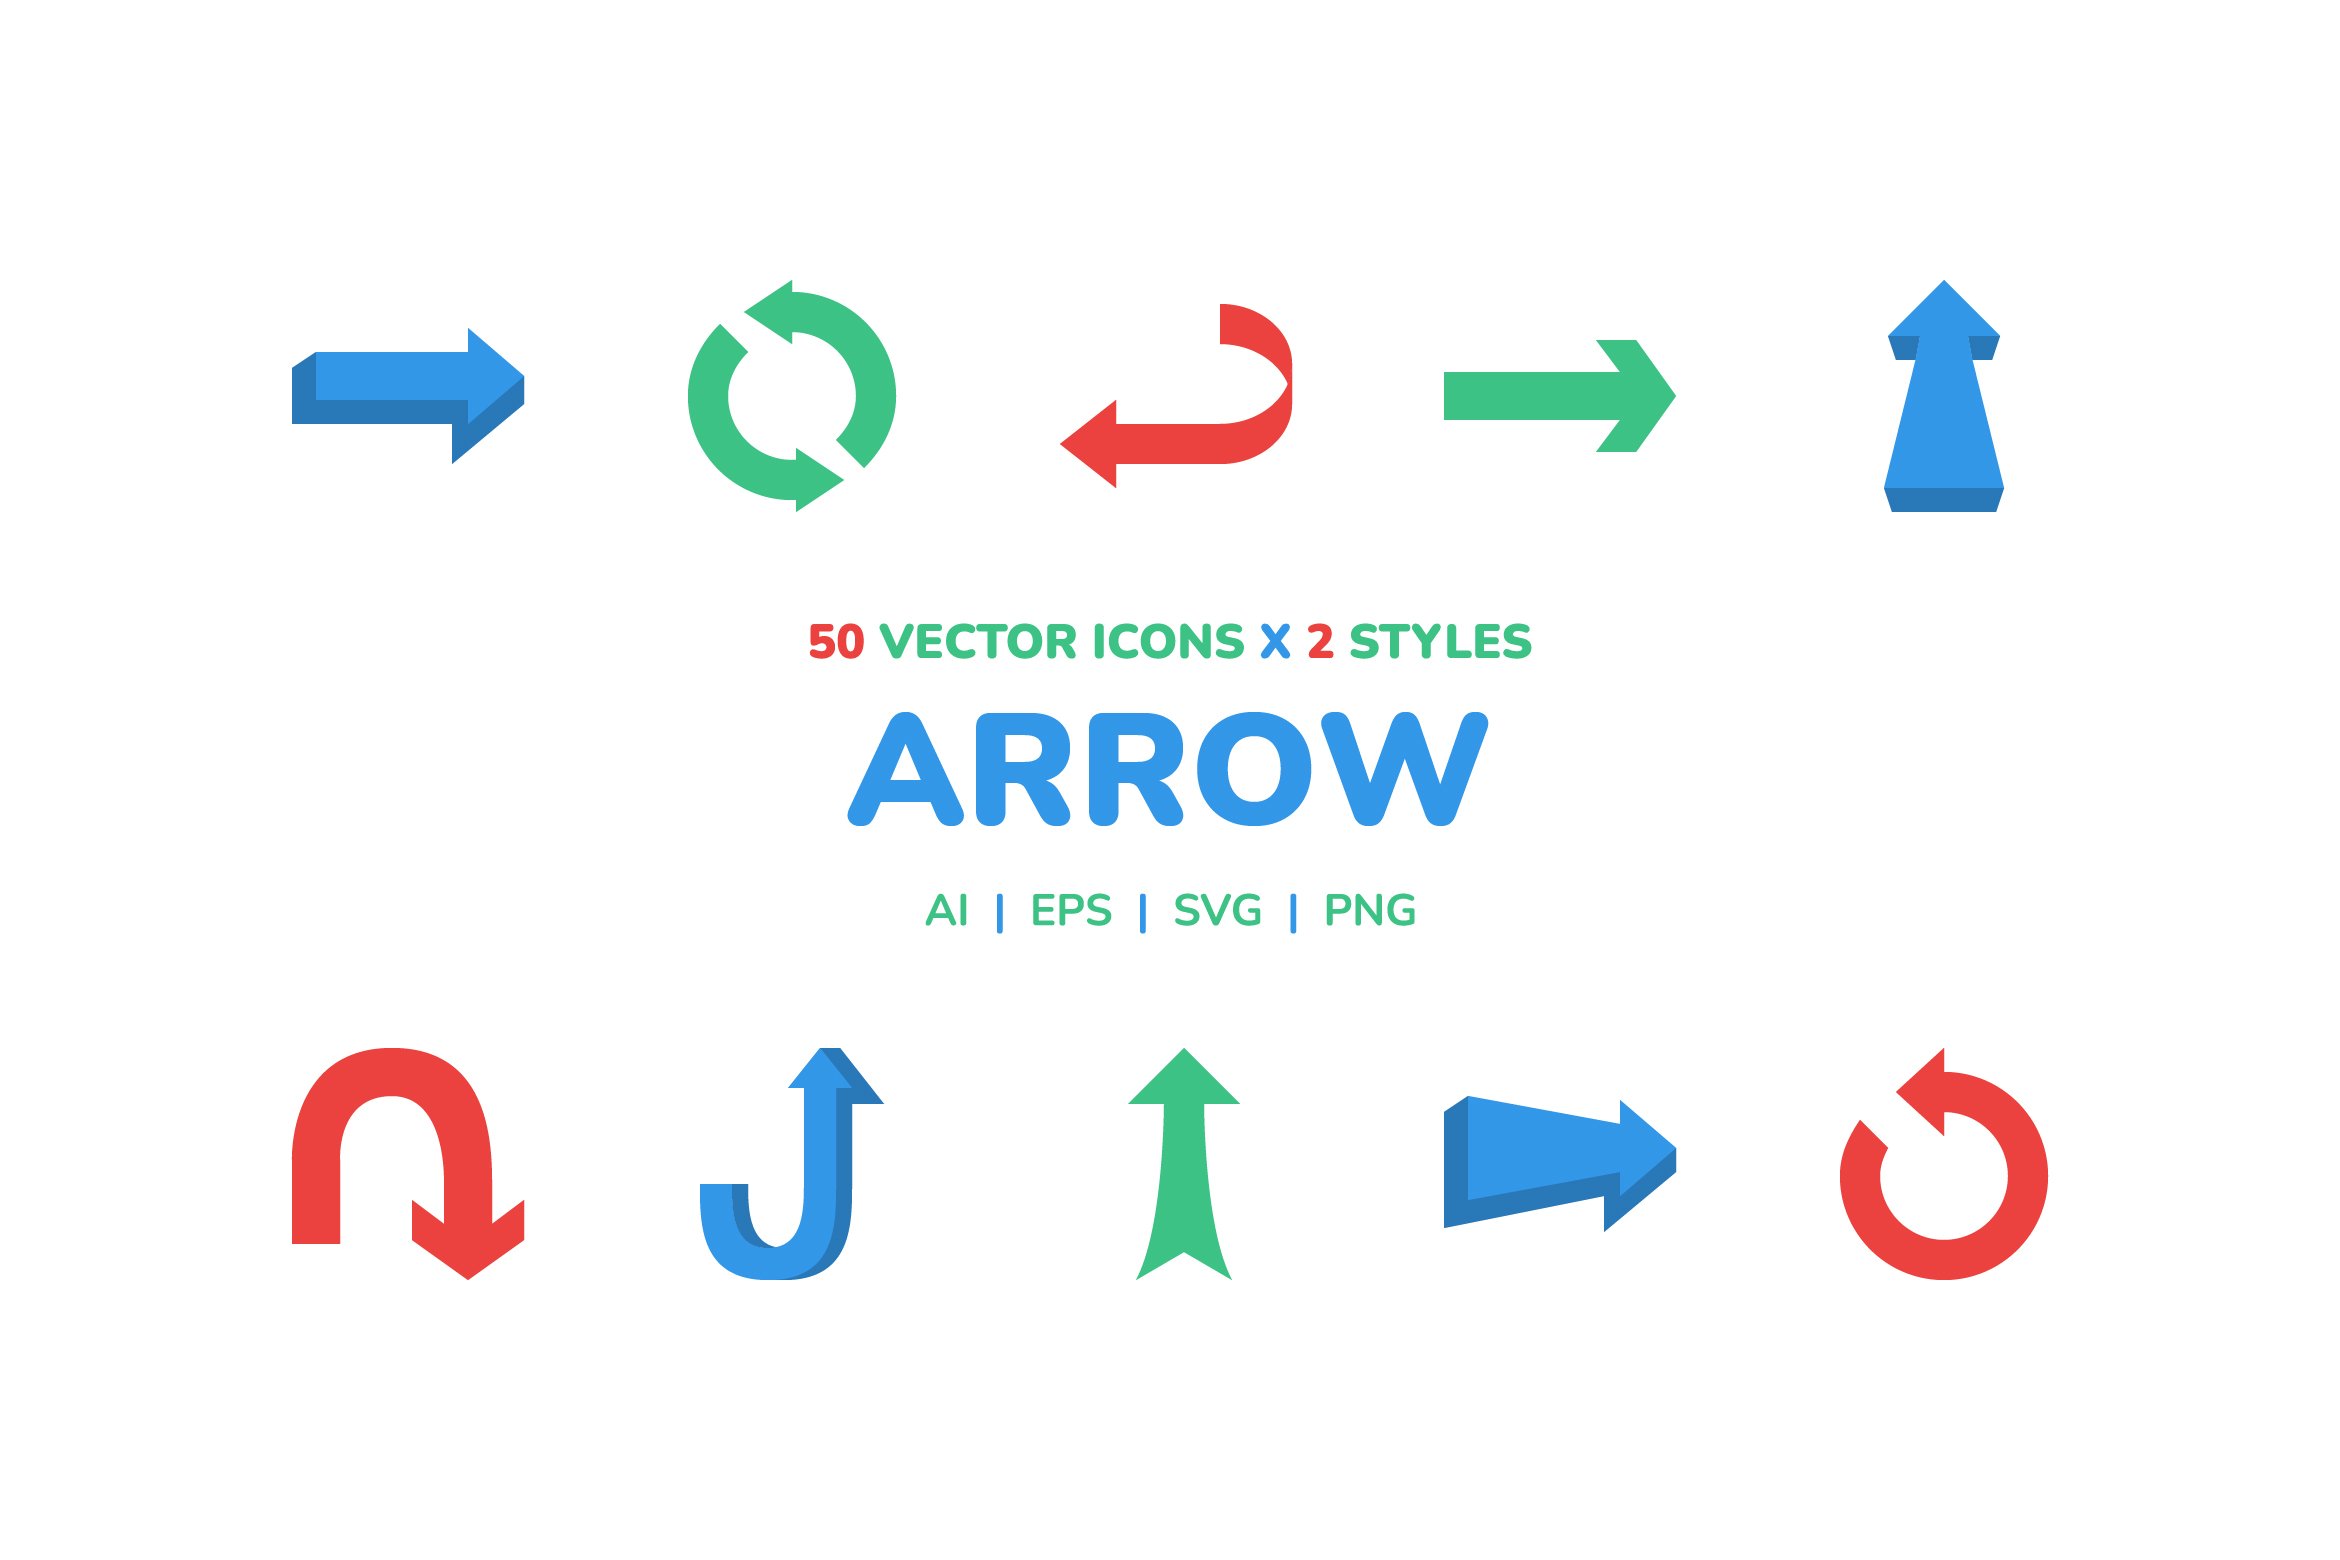 Arrow Icon Pack cover image.